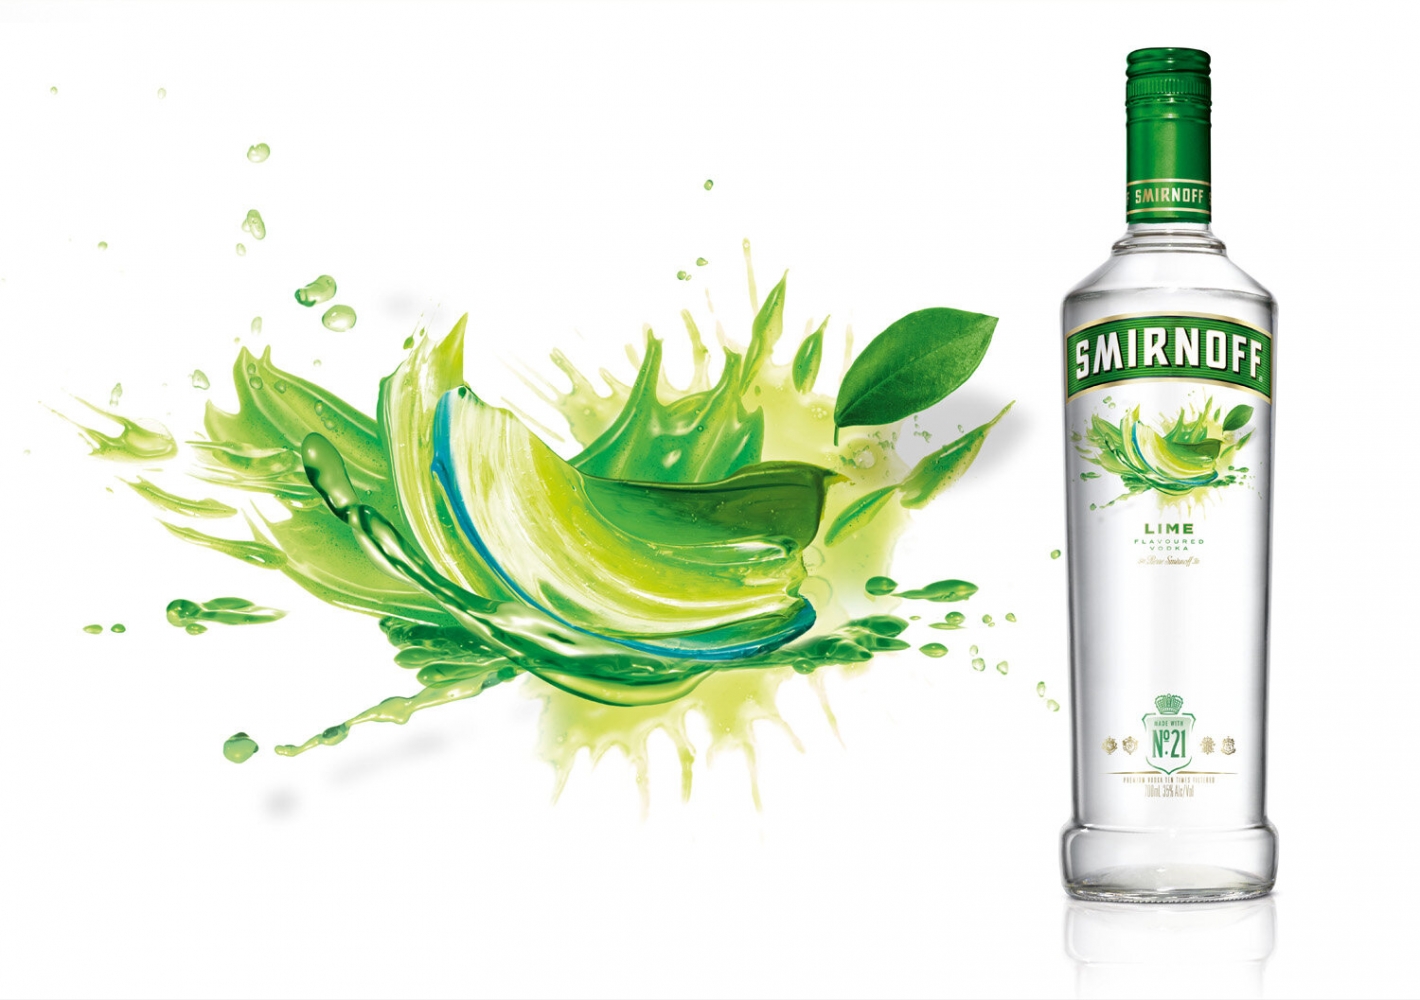 Smirnoff-lime-vodka-abstract Dominic Davies - Photography